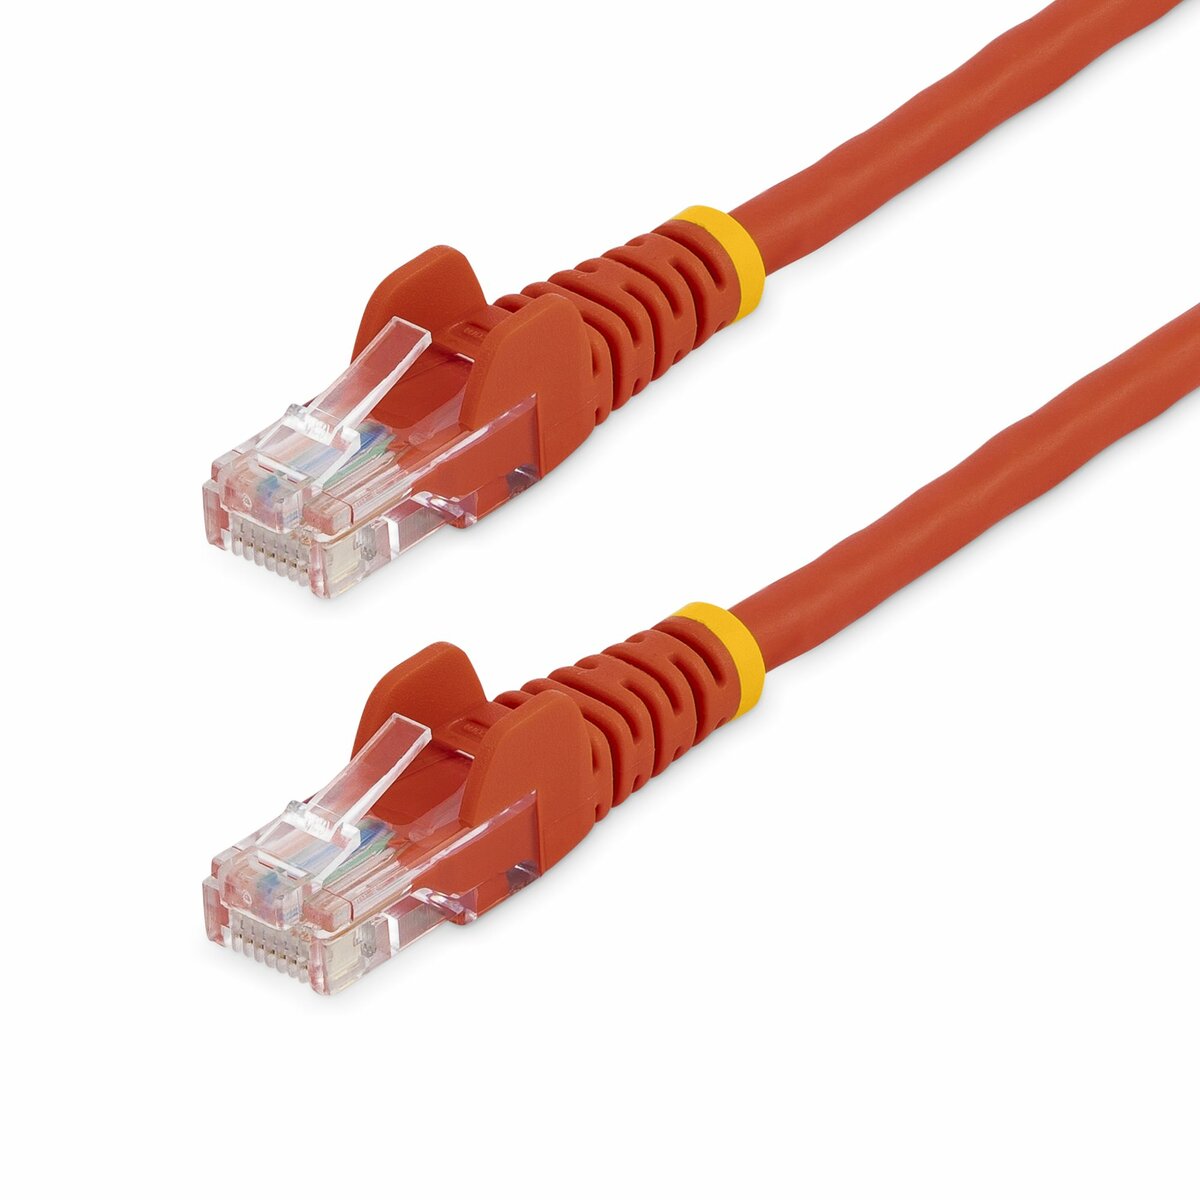 Product  StarTech.com CAT5e Cable - 10 m Red Ethernet Cable - Snagless -  CAT5e Patch Cord - CAT5e UTP Cable - RJ45 Network Cable - patch cable - 10  m - red